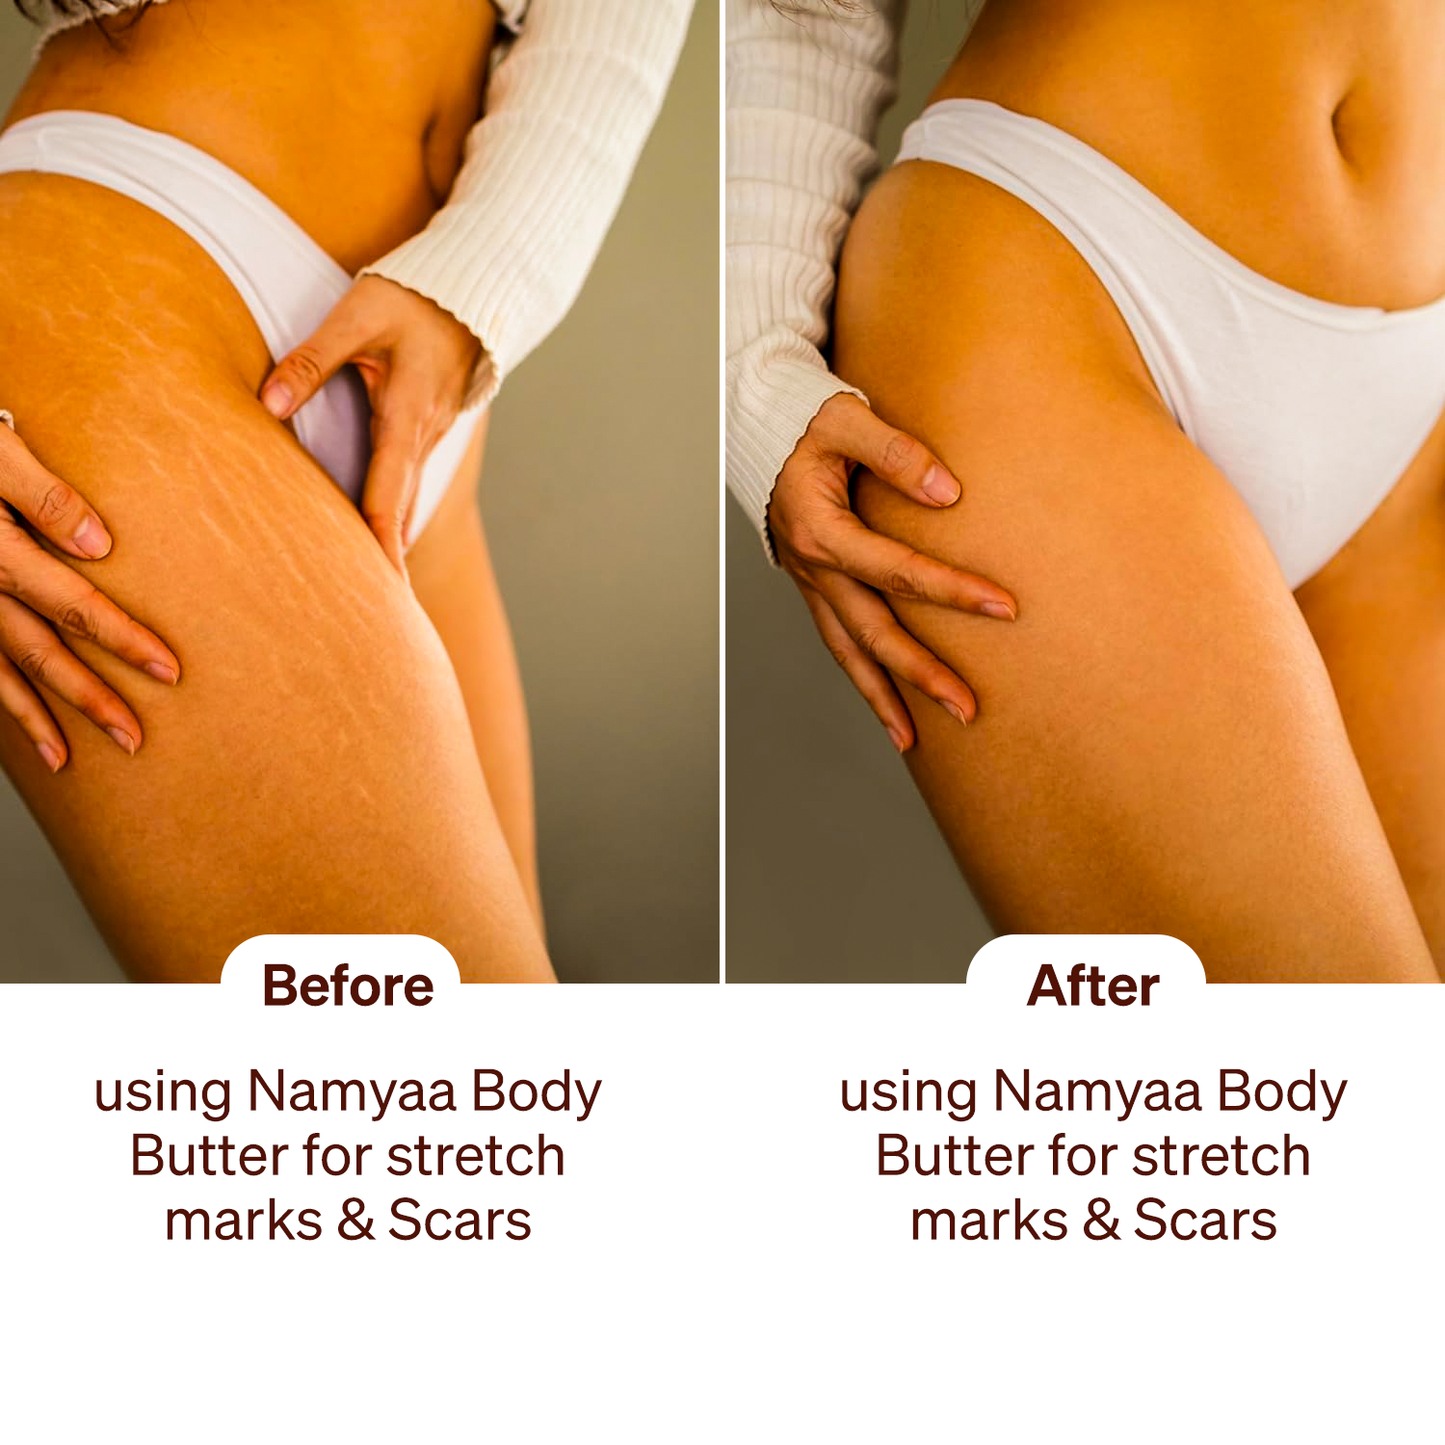 Body Butter for Stretch Marks & Scars